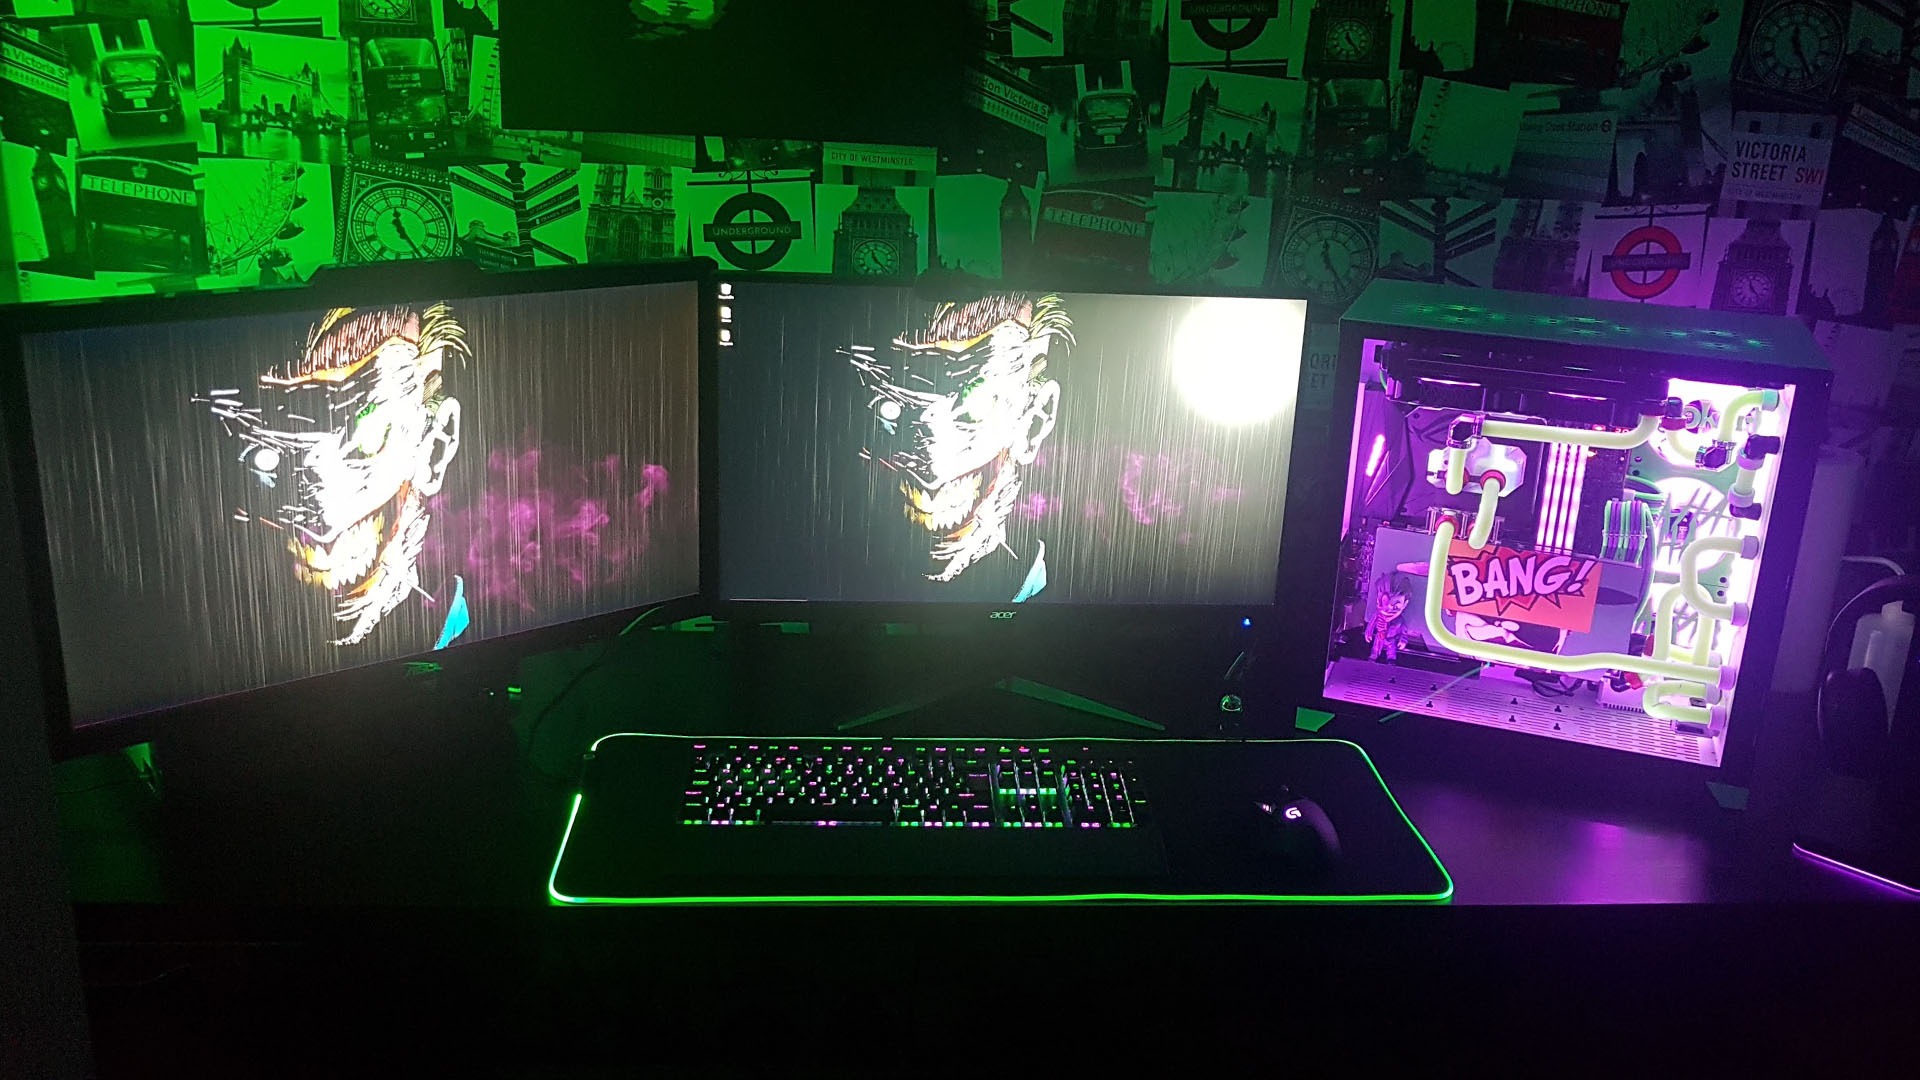 The full setup for the joker gaming PC with two monitors